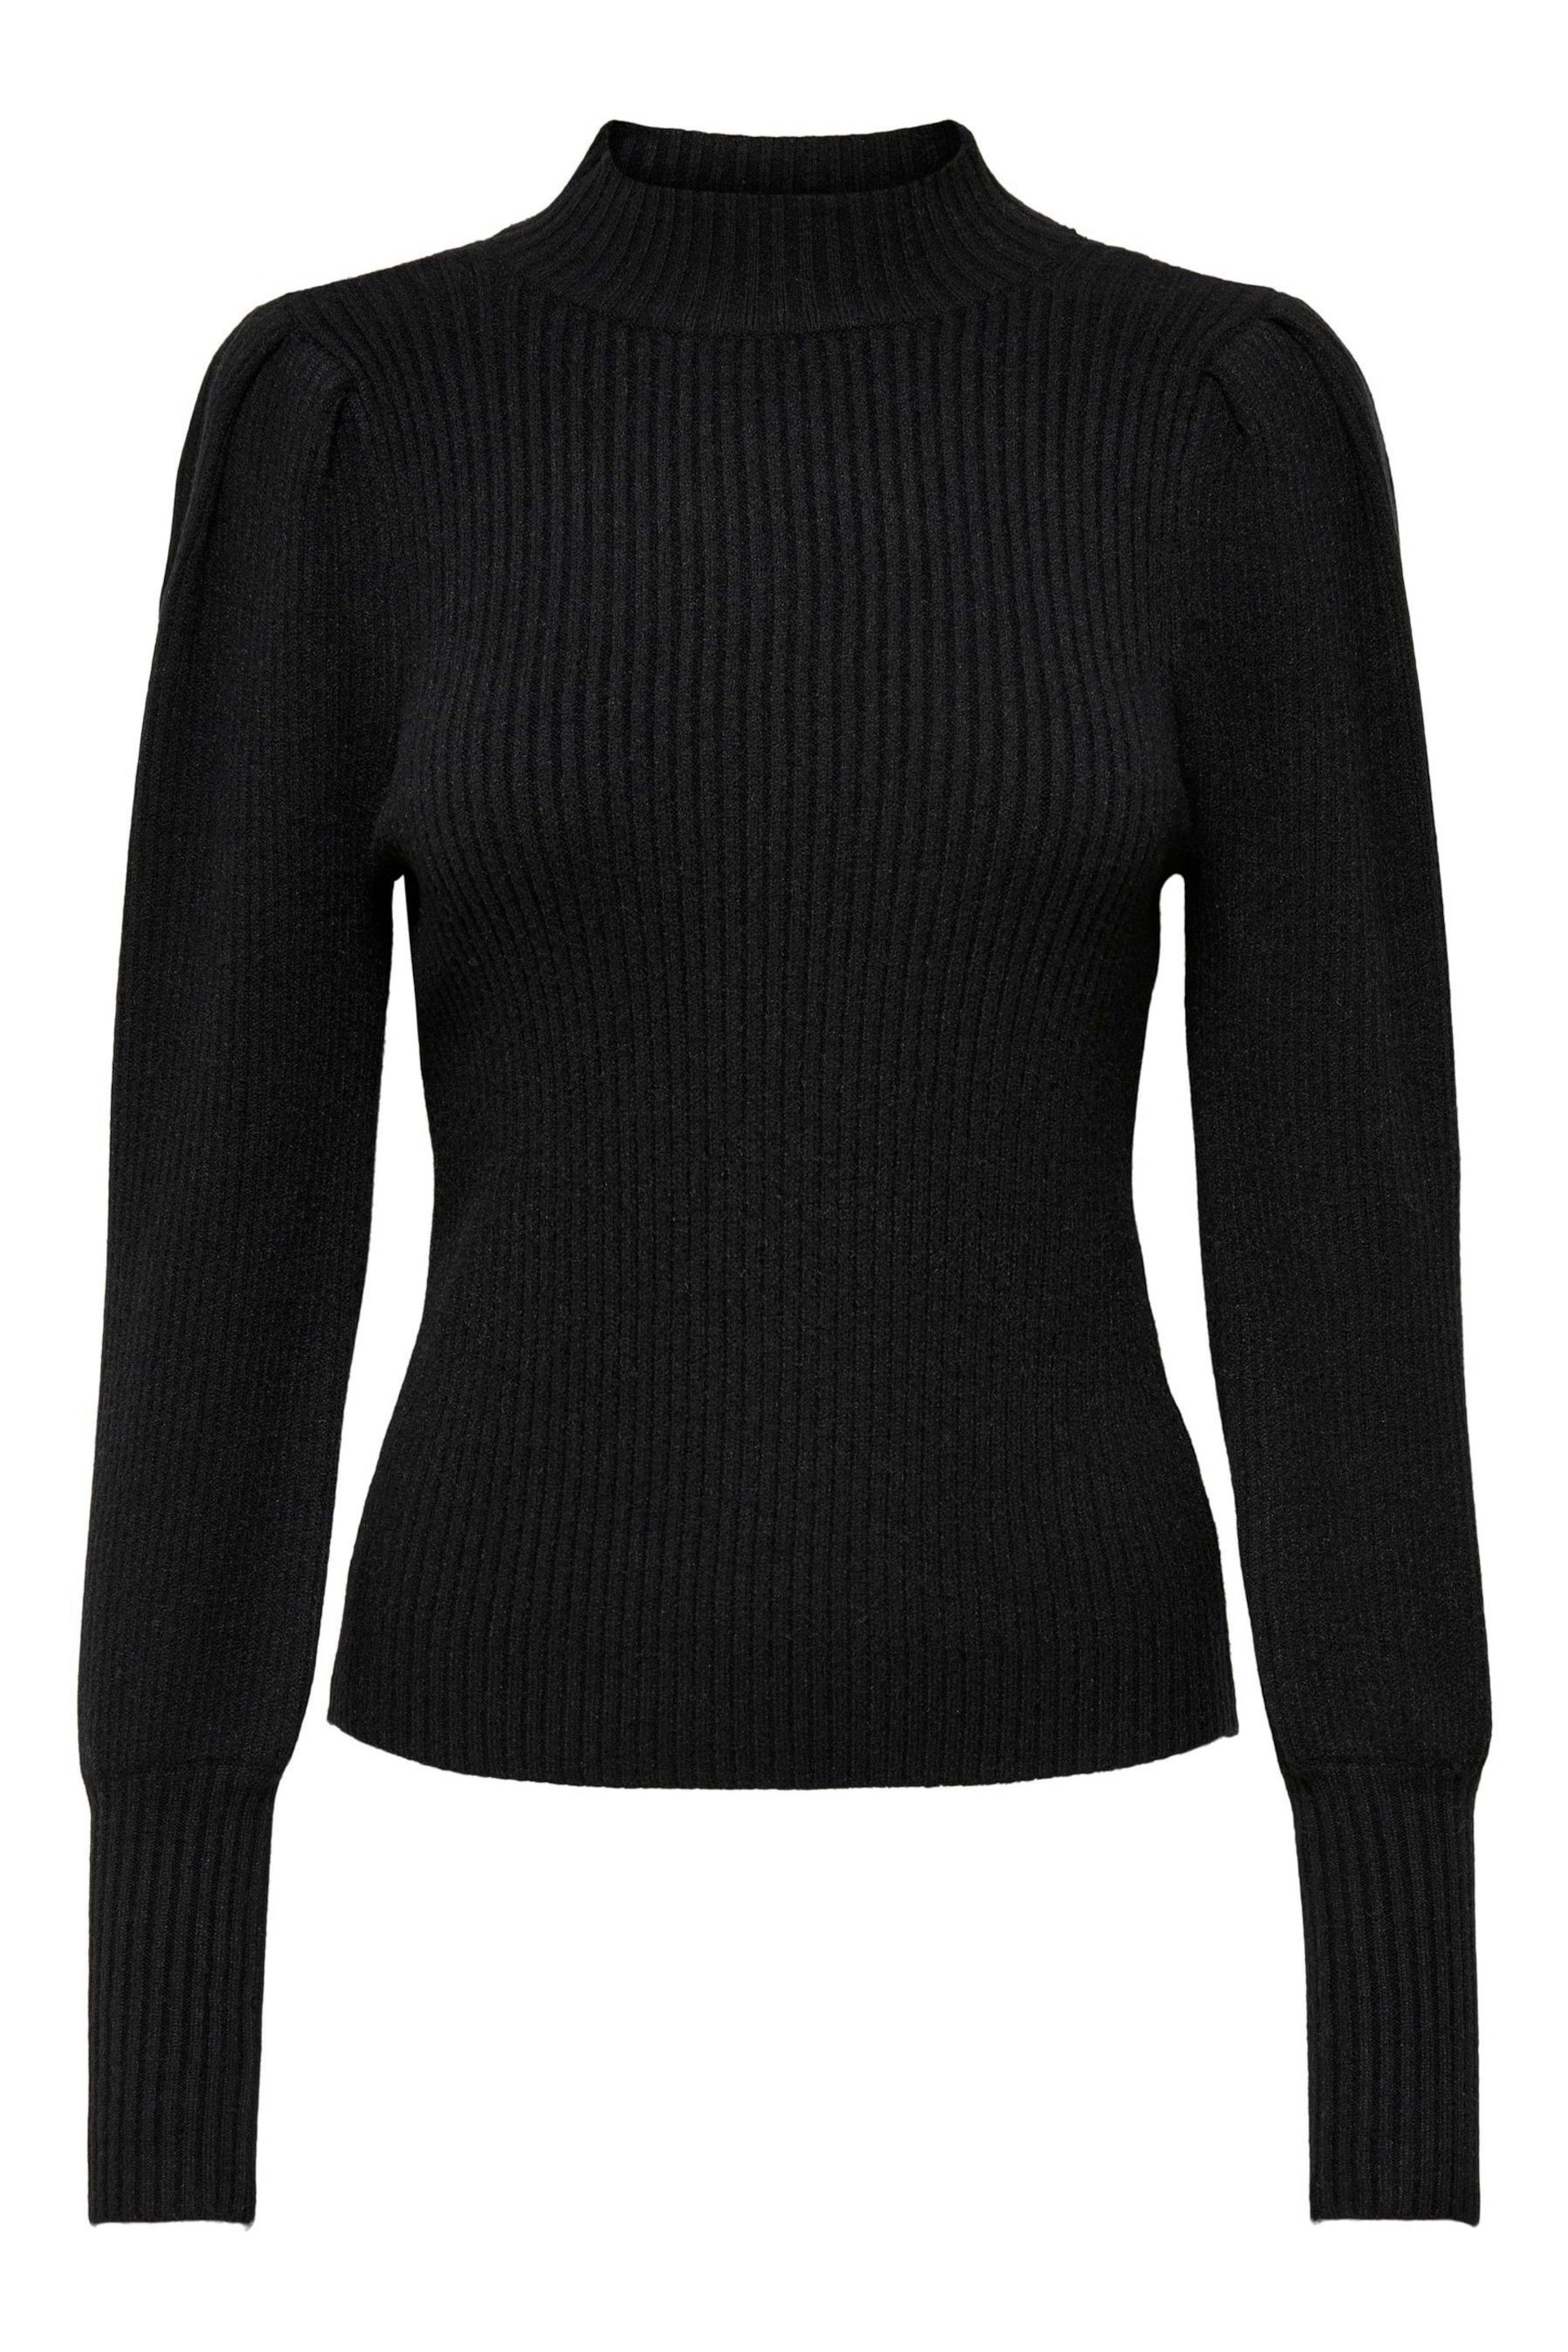 ONLY Black Puff Sleeve Knitted Jumper - Image 5 of 5